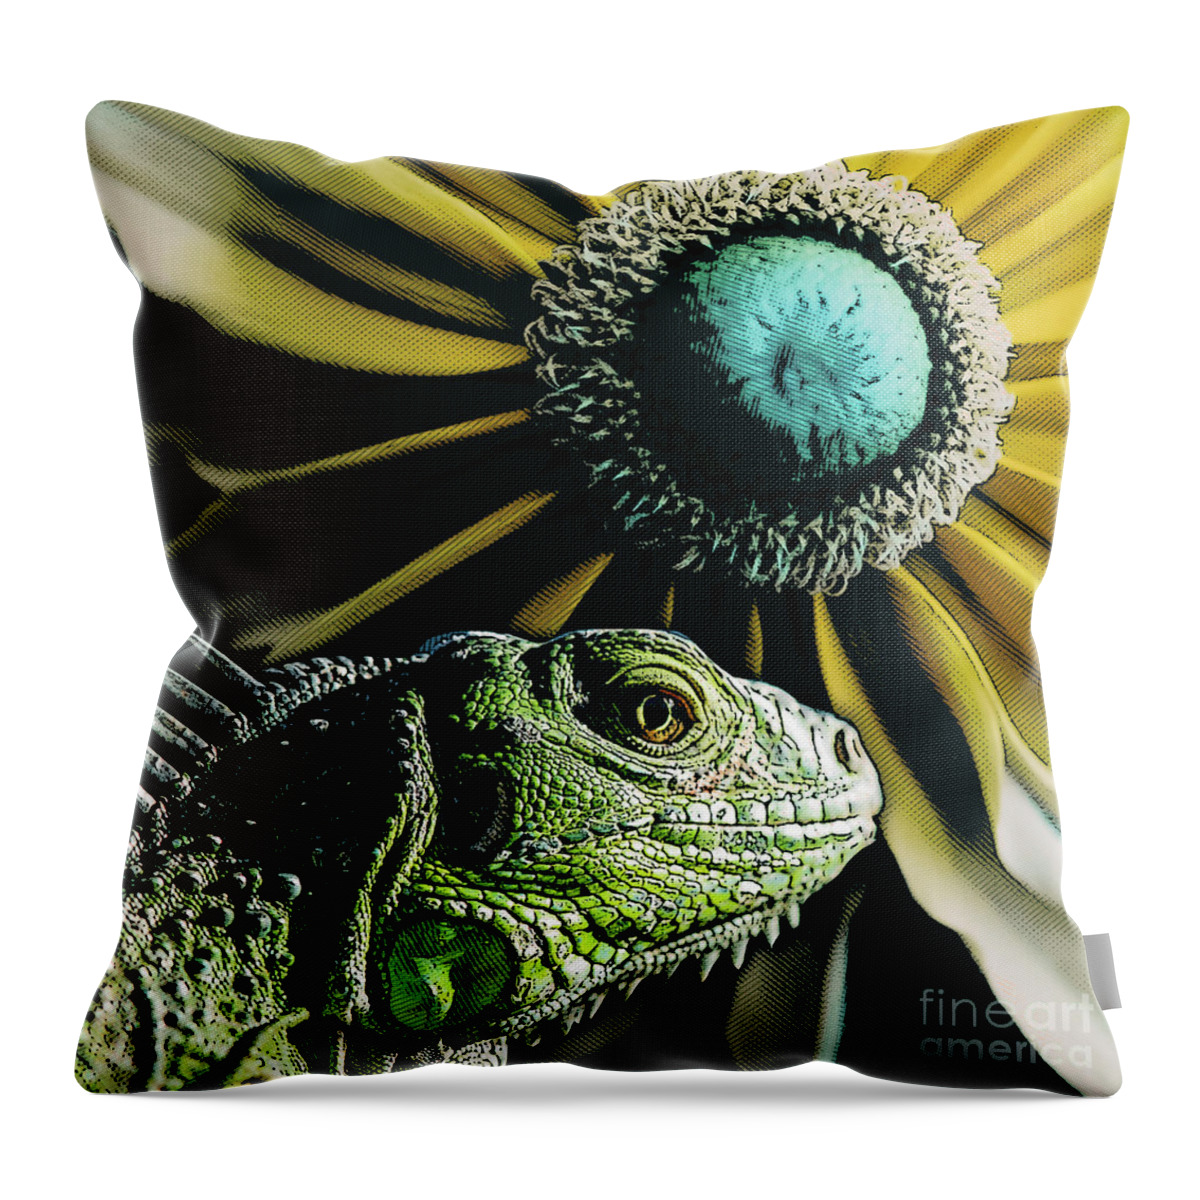 Plant Throw Pillow featuring the digital art Iguana And Sunflower by Phil Perkins